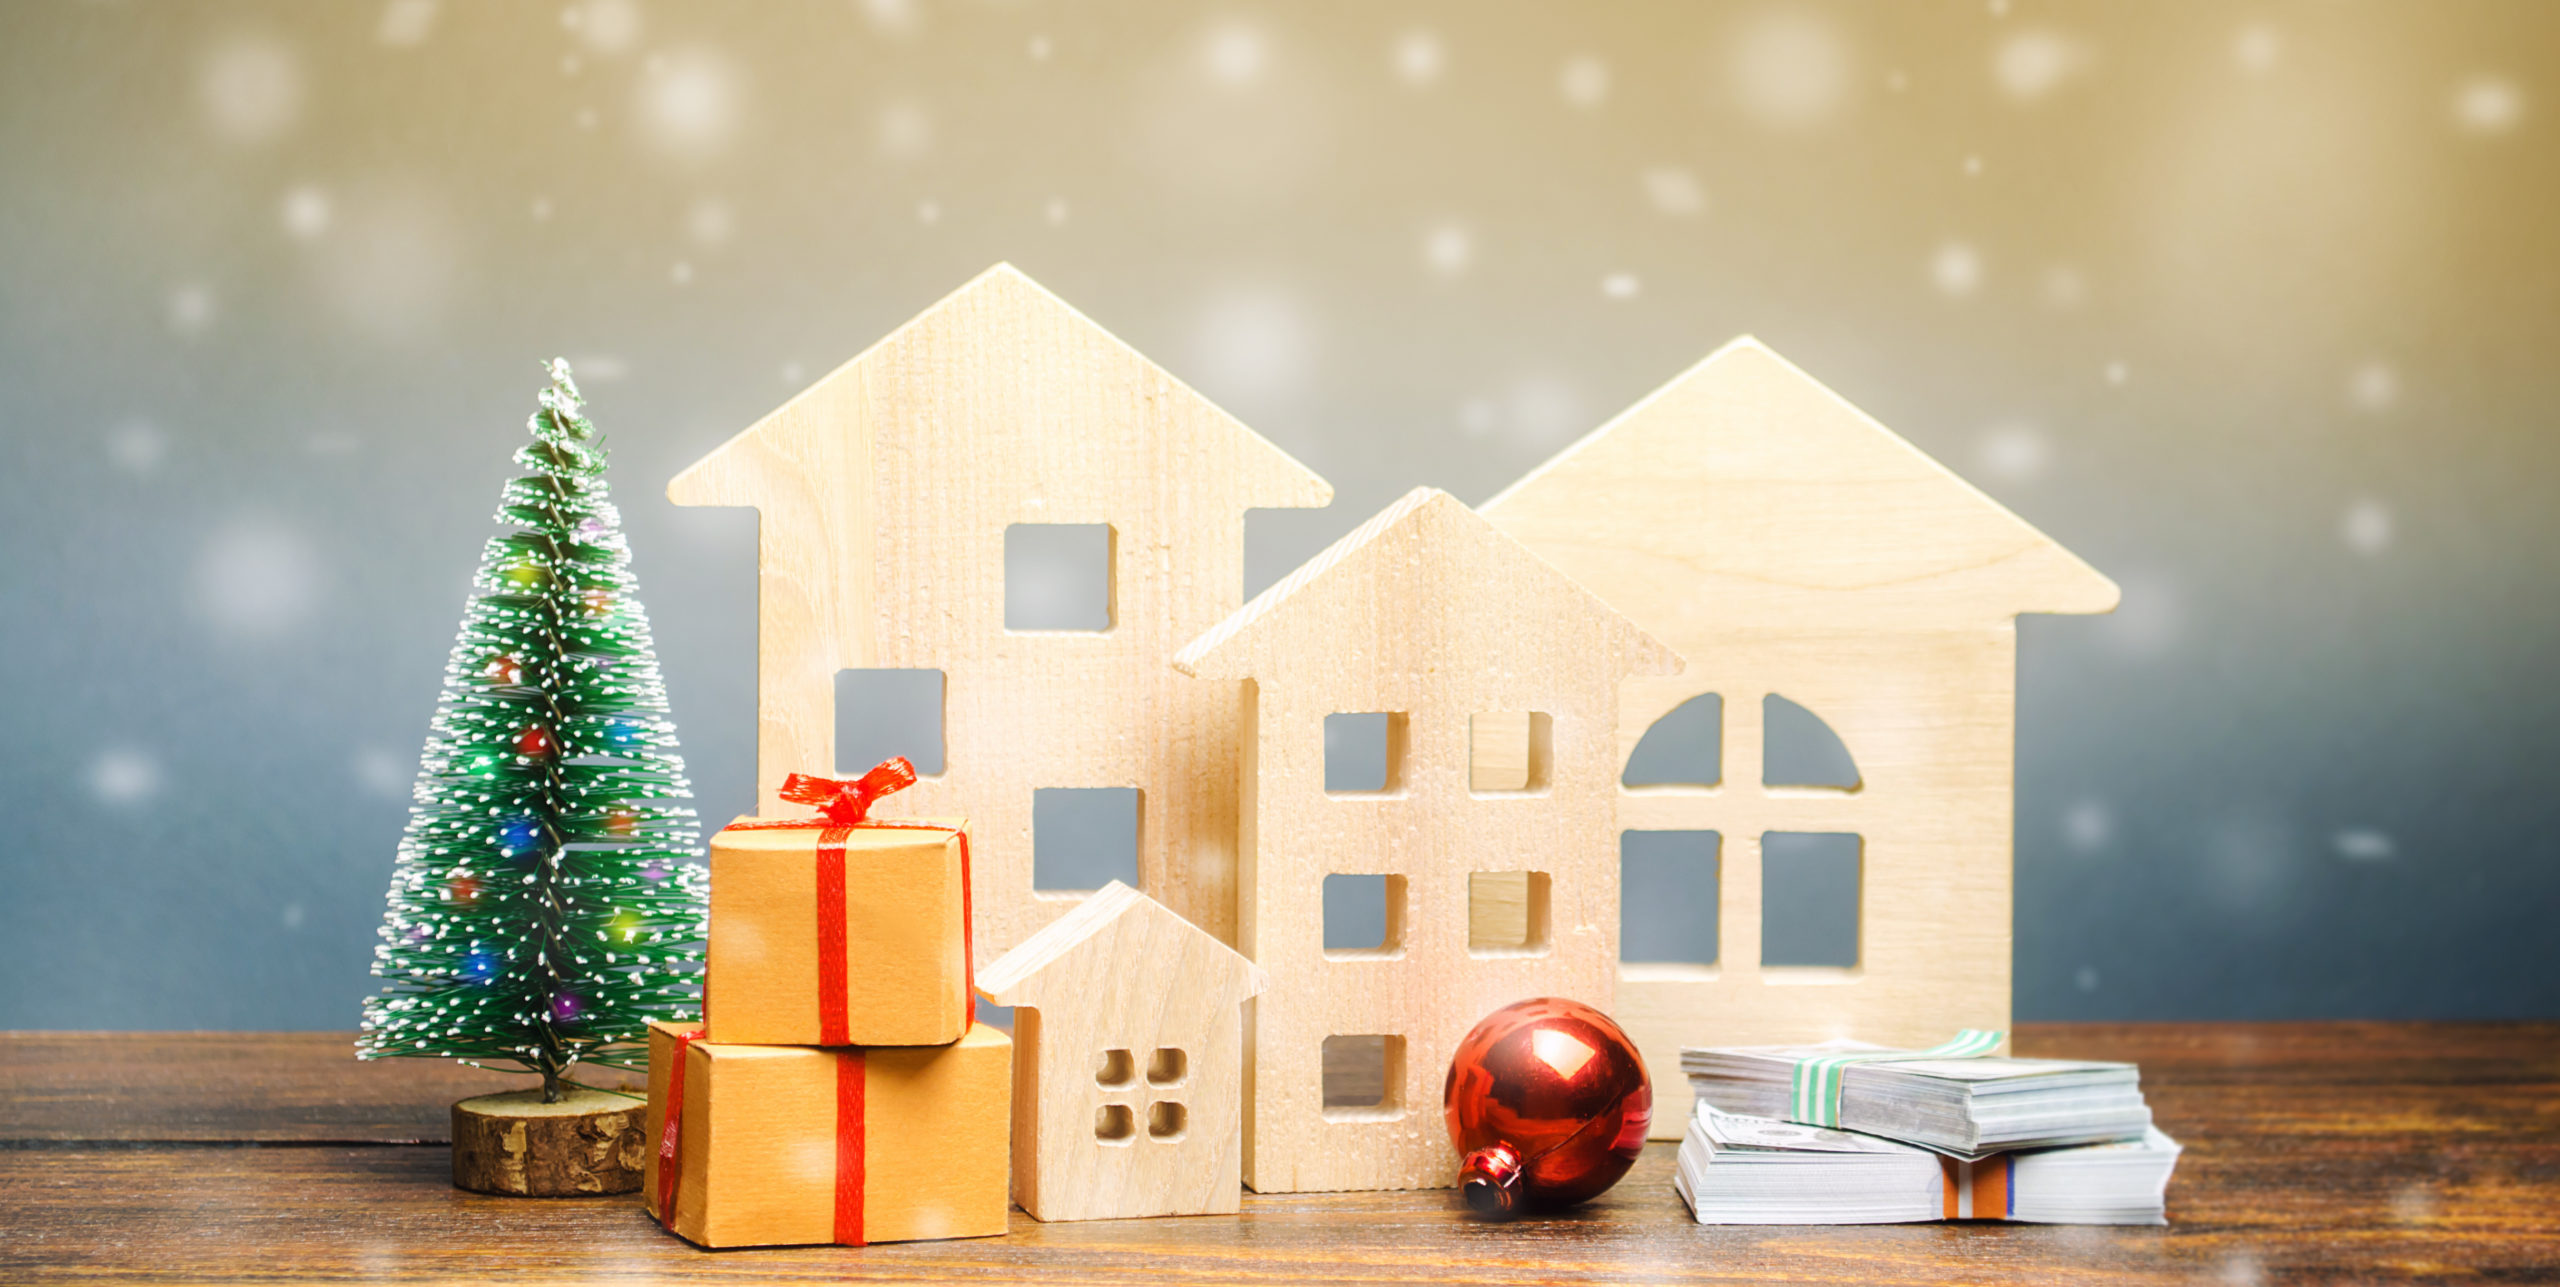 Wooden houses, Christmas tree, money and gifts. Christmas Sale of Real Estate. New Year discounts for buying housing. Purchase apartments at a low price. Holiday discounts. Favorable prices